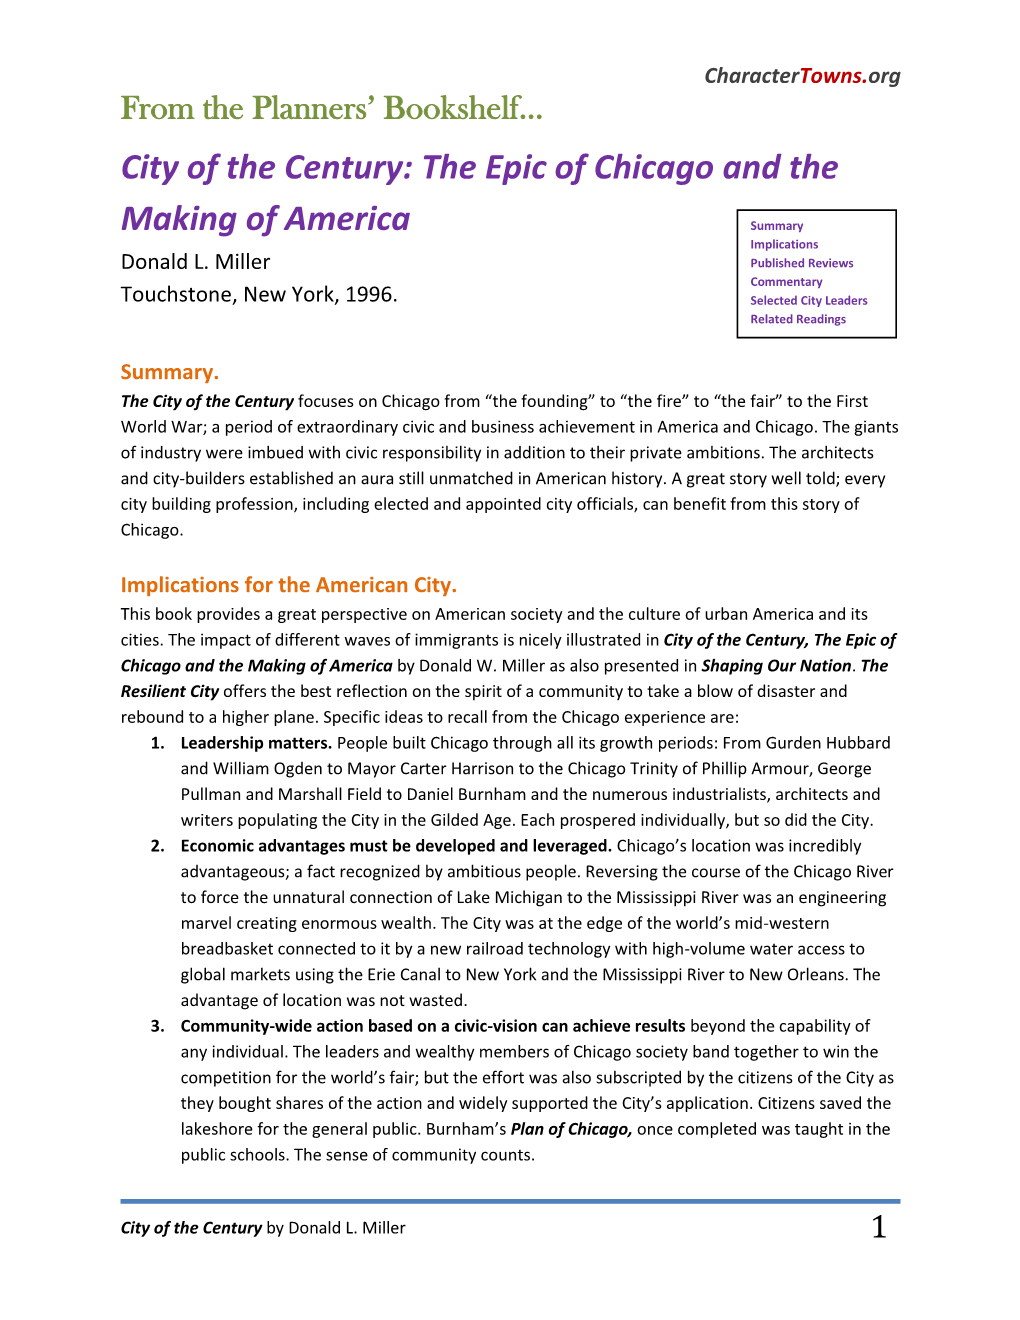 City of the Century: the Epic of Chicago and the Making of America, Miller, Donald L, Touchstone, New York, 1996